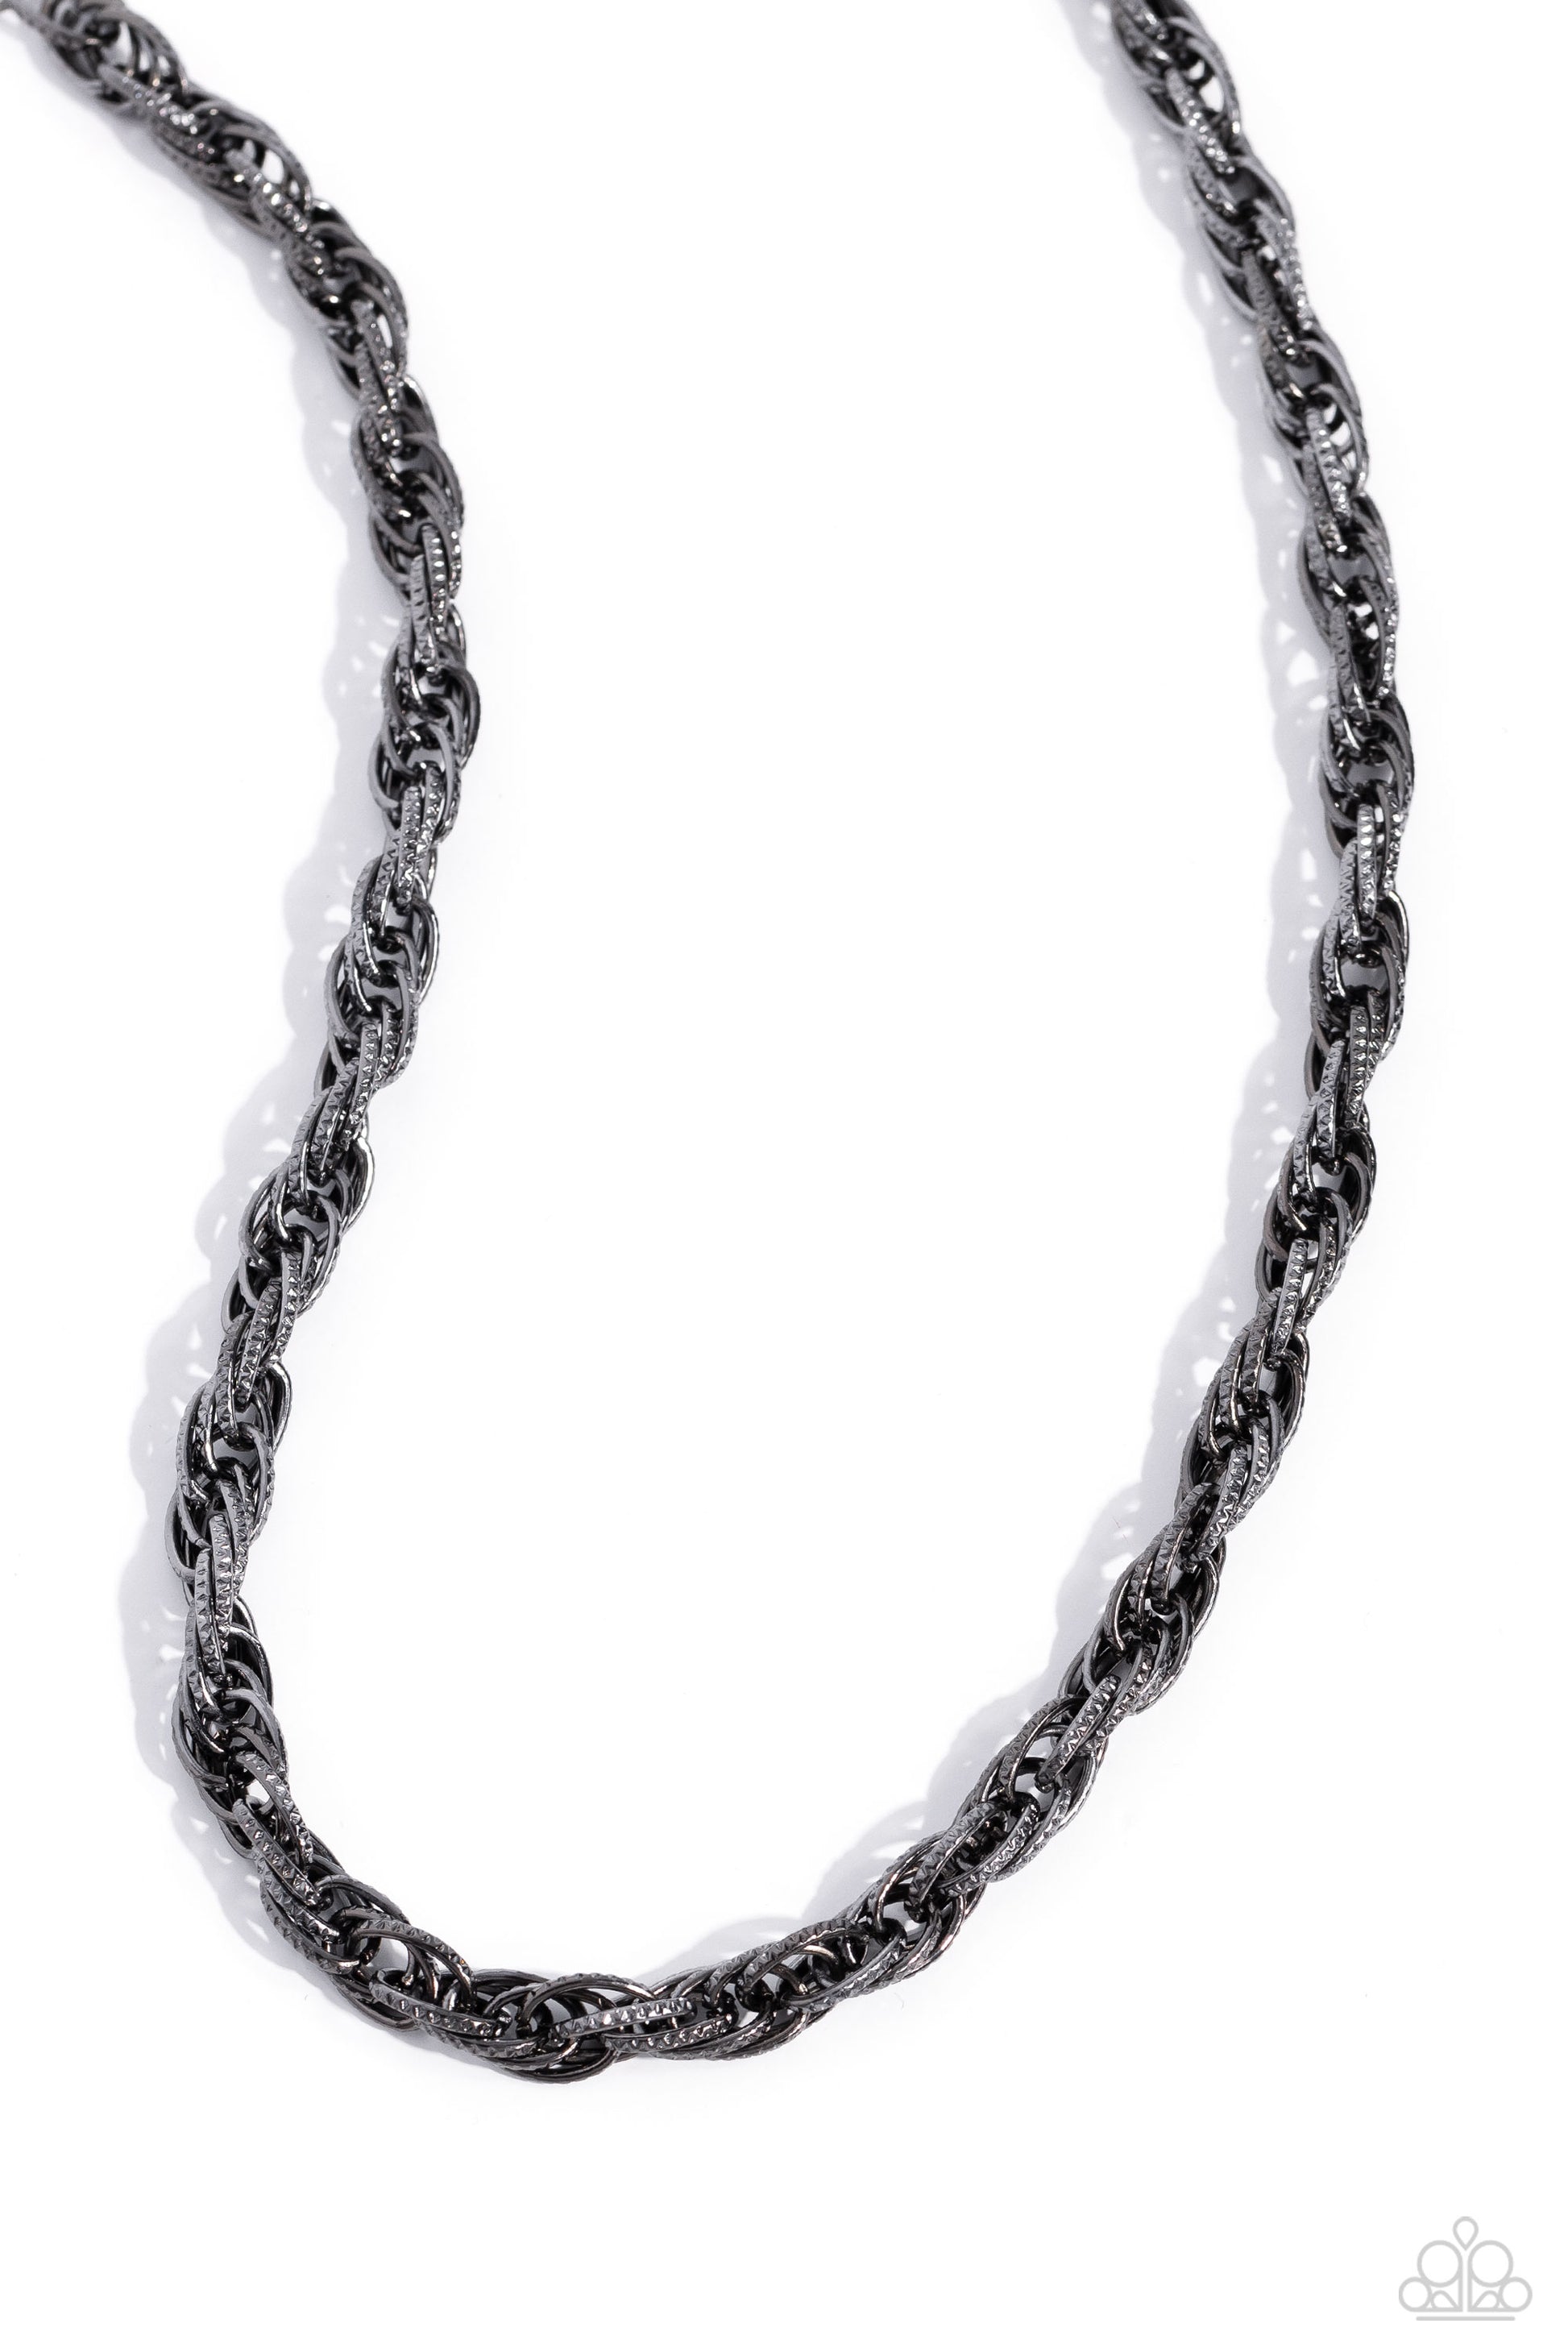 Braided Ballad Black Necklace - Paparazzi Accessories  Rings of gunmetal, each embroidered in tactile texture weave into an interconnected braided centerpiece for a monochromatic chic look. Features an adjustable clasp closure.  Sold as one individual necklace. Includes one pair of matching earrings.  P2ED-BKXX-199XX